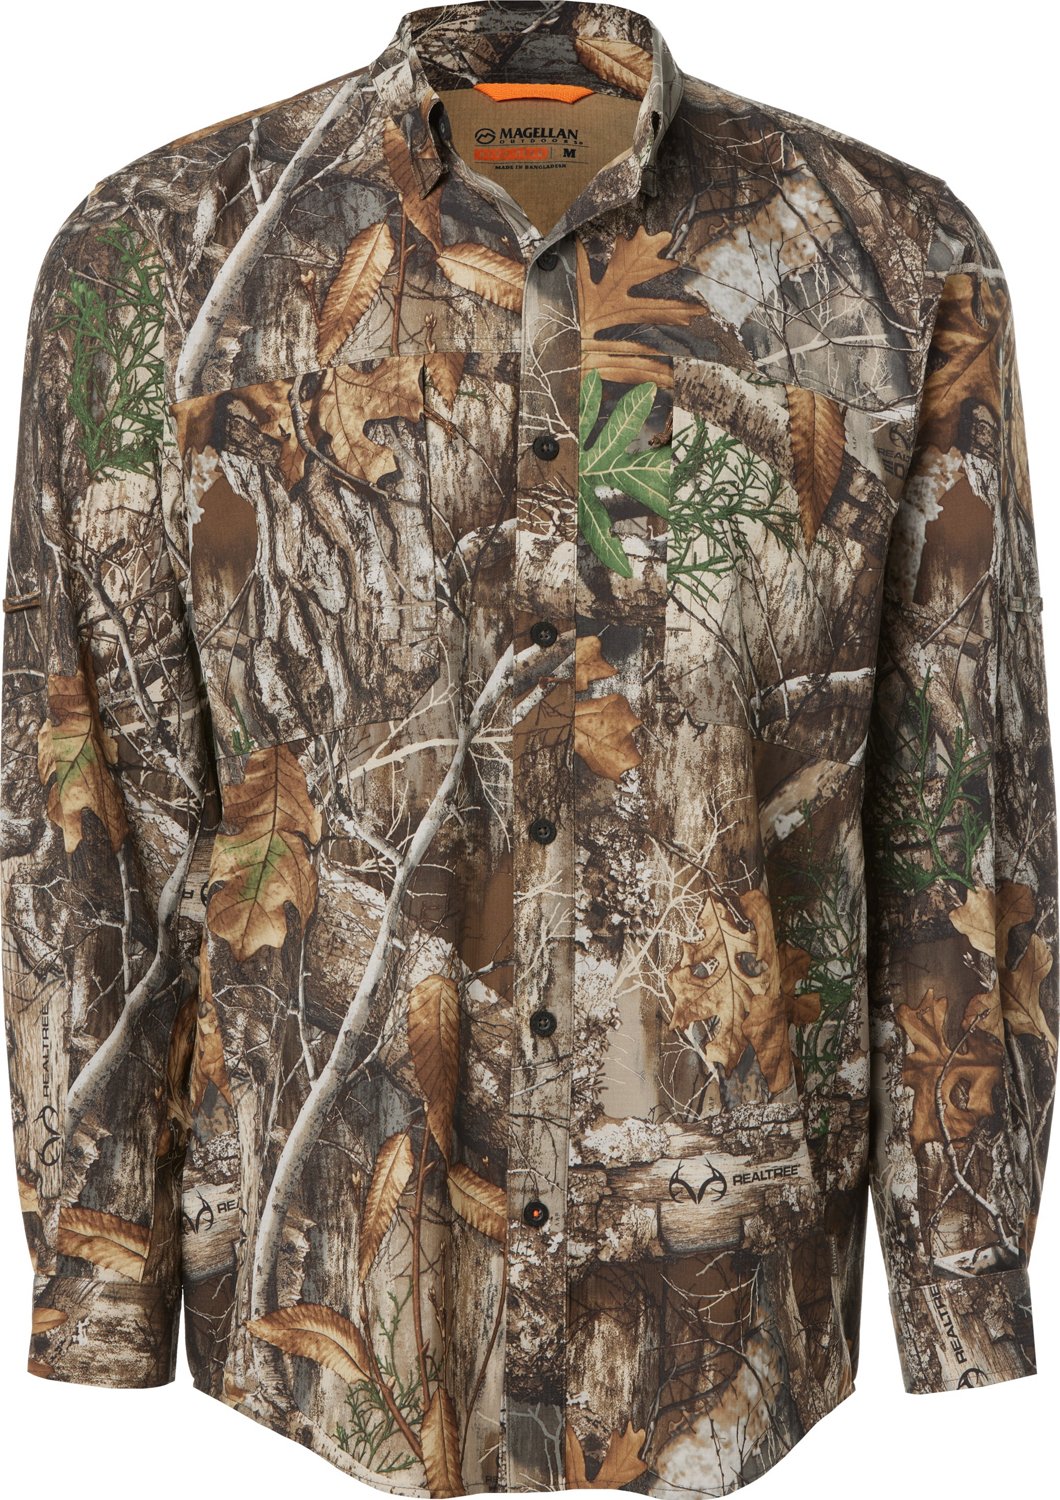 Hunting Clothes for Men | Price Match Guaranteed